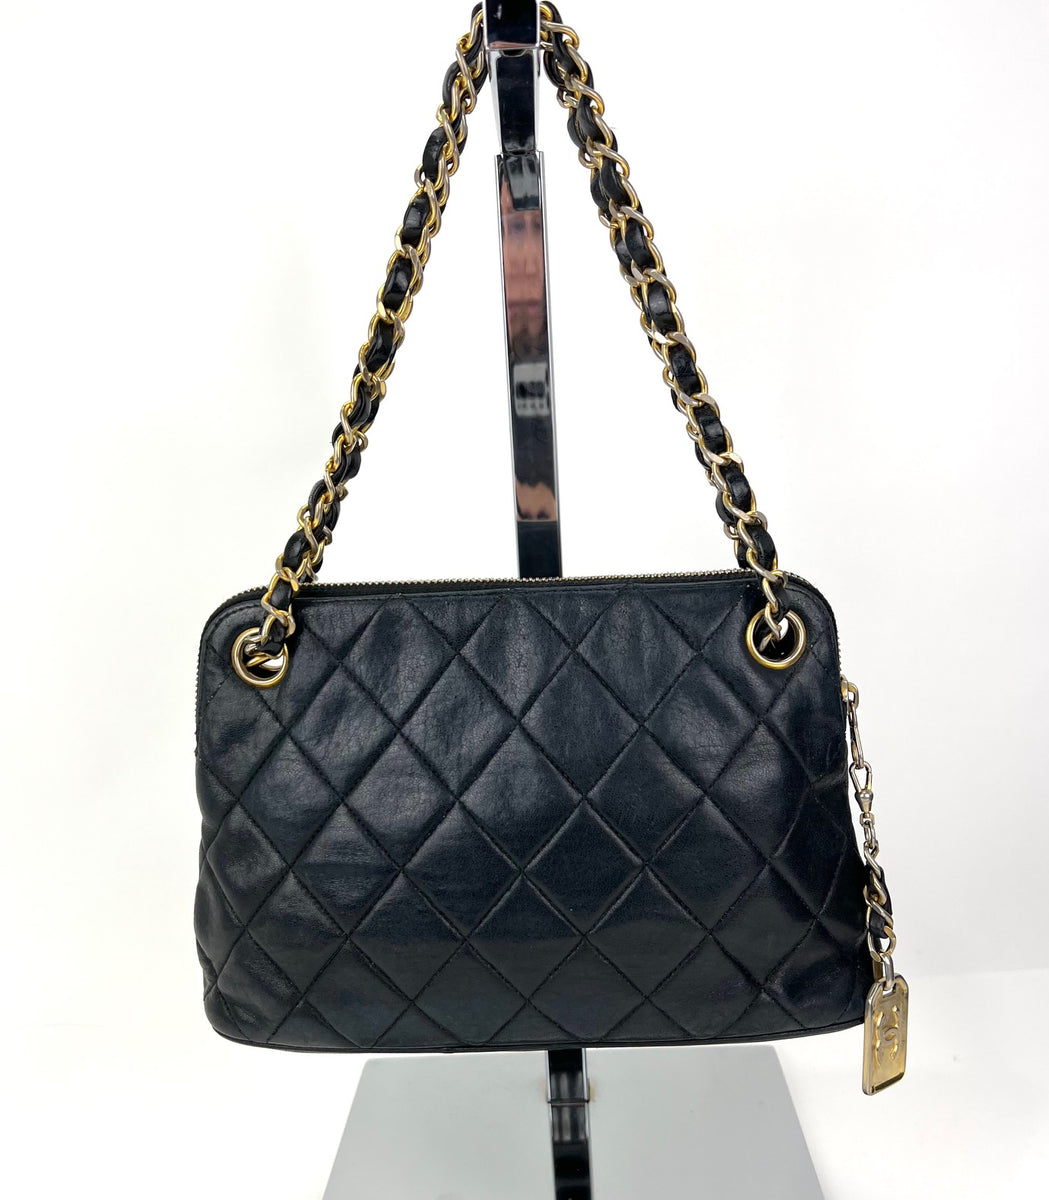 CHANEL Bag Quilted Lambskin Leather Chain Vintage Black Mini Shoulder Bag  Preowned